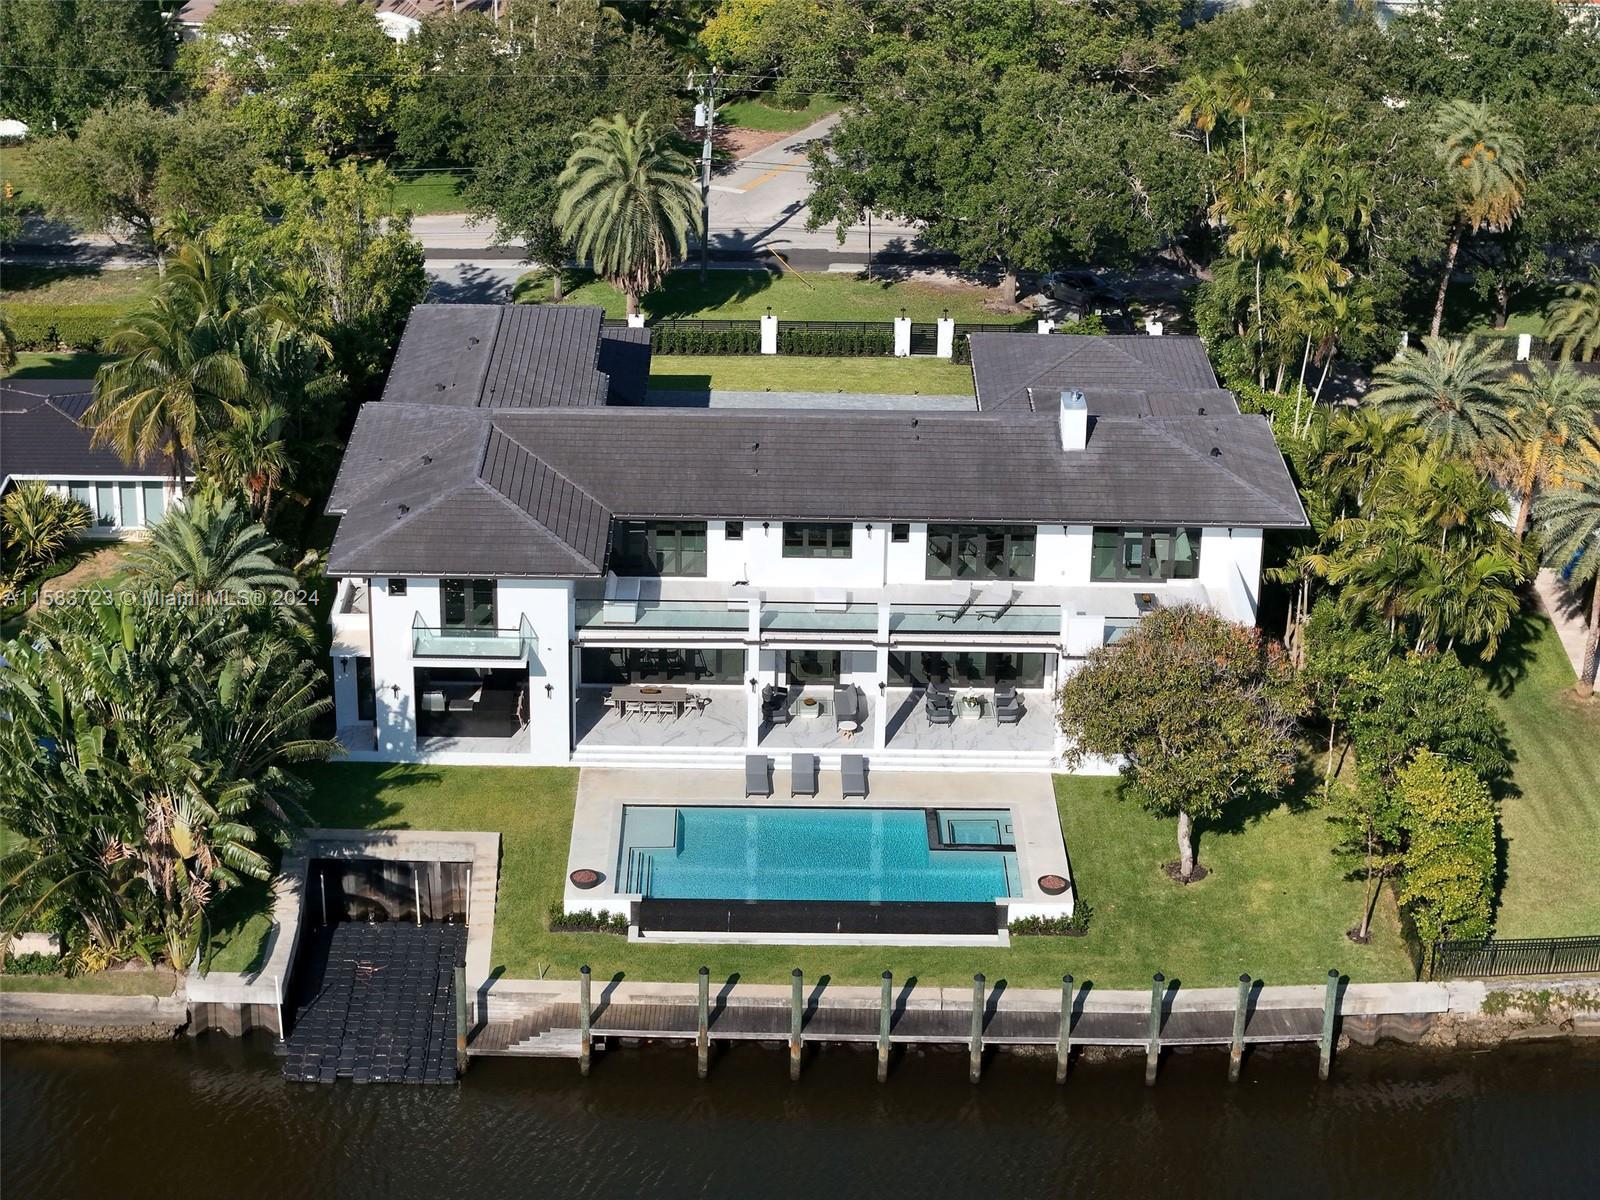 Elegant new construction on Coral Gables Waterway! This custom-built, gated estate abounds with luxury details and craftsmanship throughout. Featuring an expansive backyard replete with large covered terrace, infinity-edge pool, spa, boat cut-out & decadent summer kitchen. A wing is dedicated to entertainment: game room, office, theatre & wet bar adjoining an upscale cozy formal living room w/gas fireplace.  The graceful master suite has large dual closets, opulent bathroom, and a walk-in safe room. Upstairs bedrooms access walk-out balcony overlooking the tranquil waterway, homework stations, an arts/crafts nook, a second laundry room, and a wet bar with refrigerator.  Two staircases and elevator.  A full-house generator powered by city gas ensures safety and continuation of lifestyle.